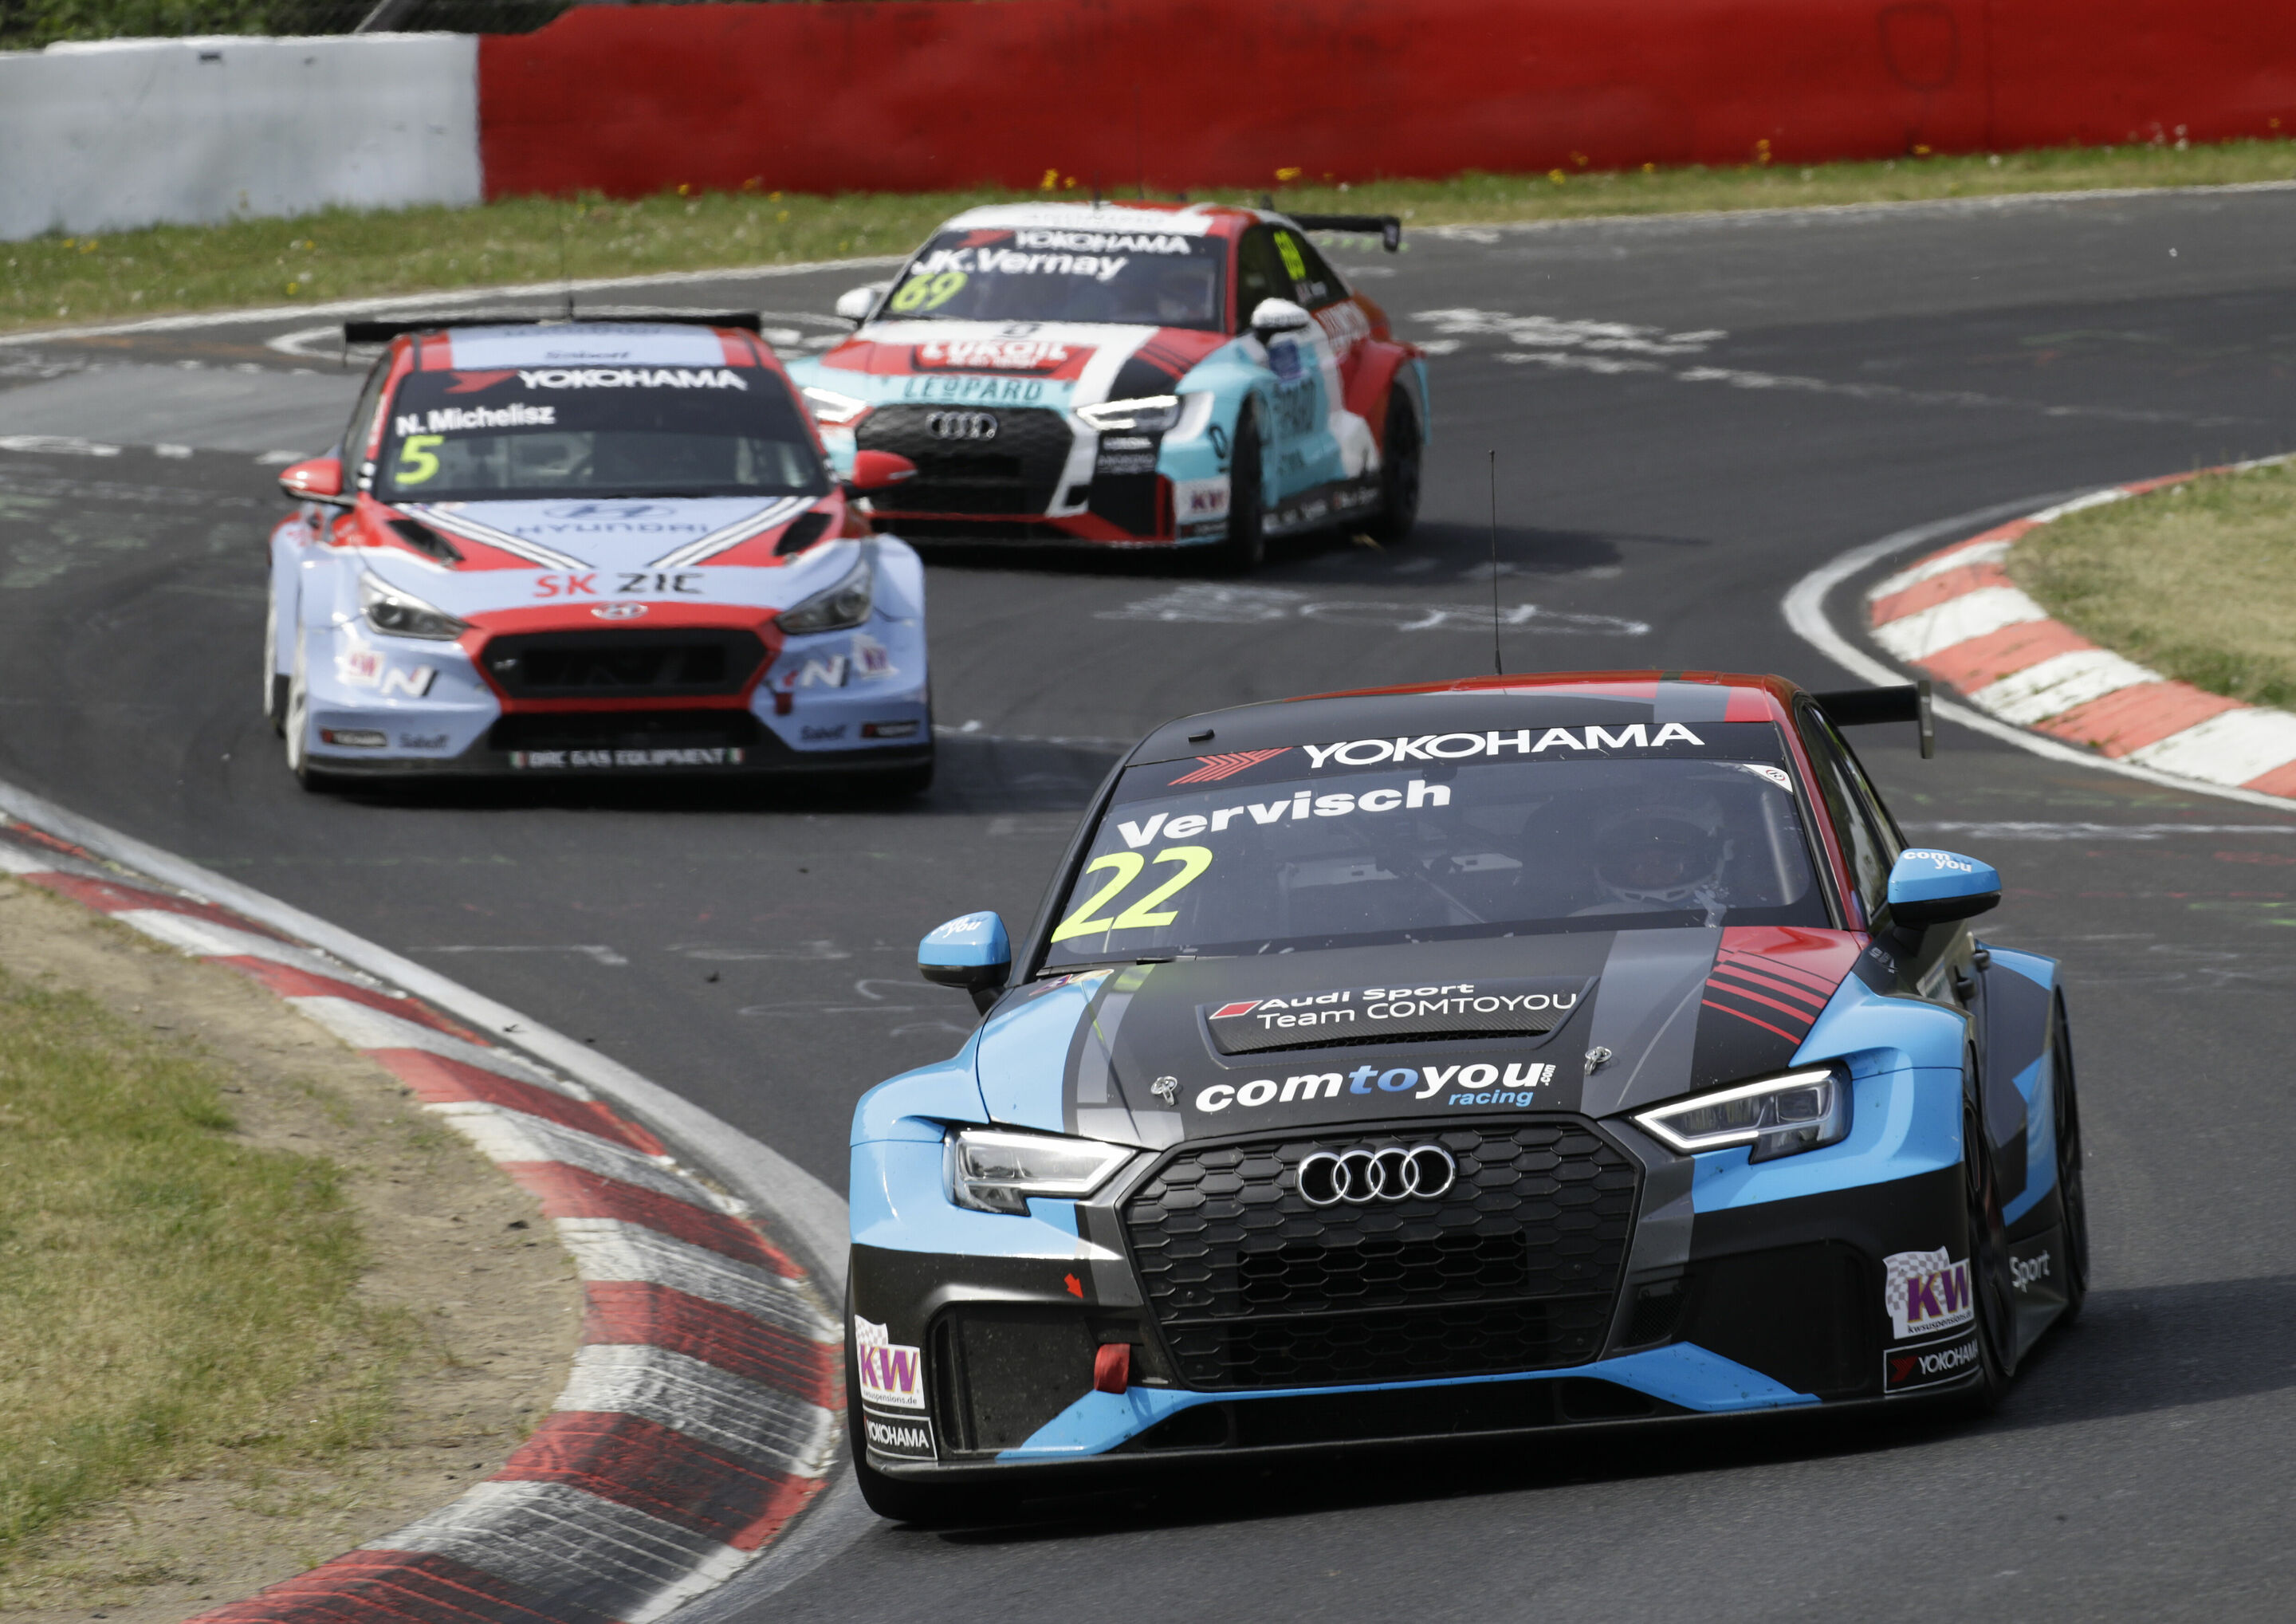 WTCR - FIA World Touring Car Cup 2018